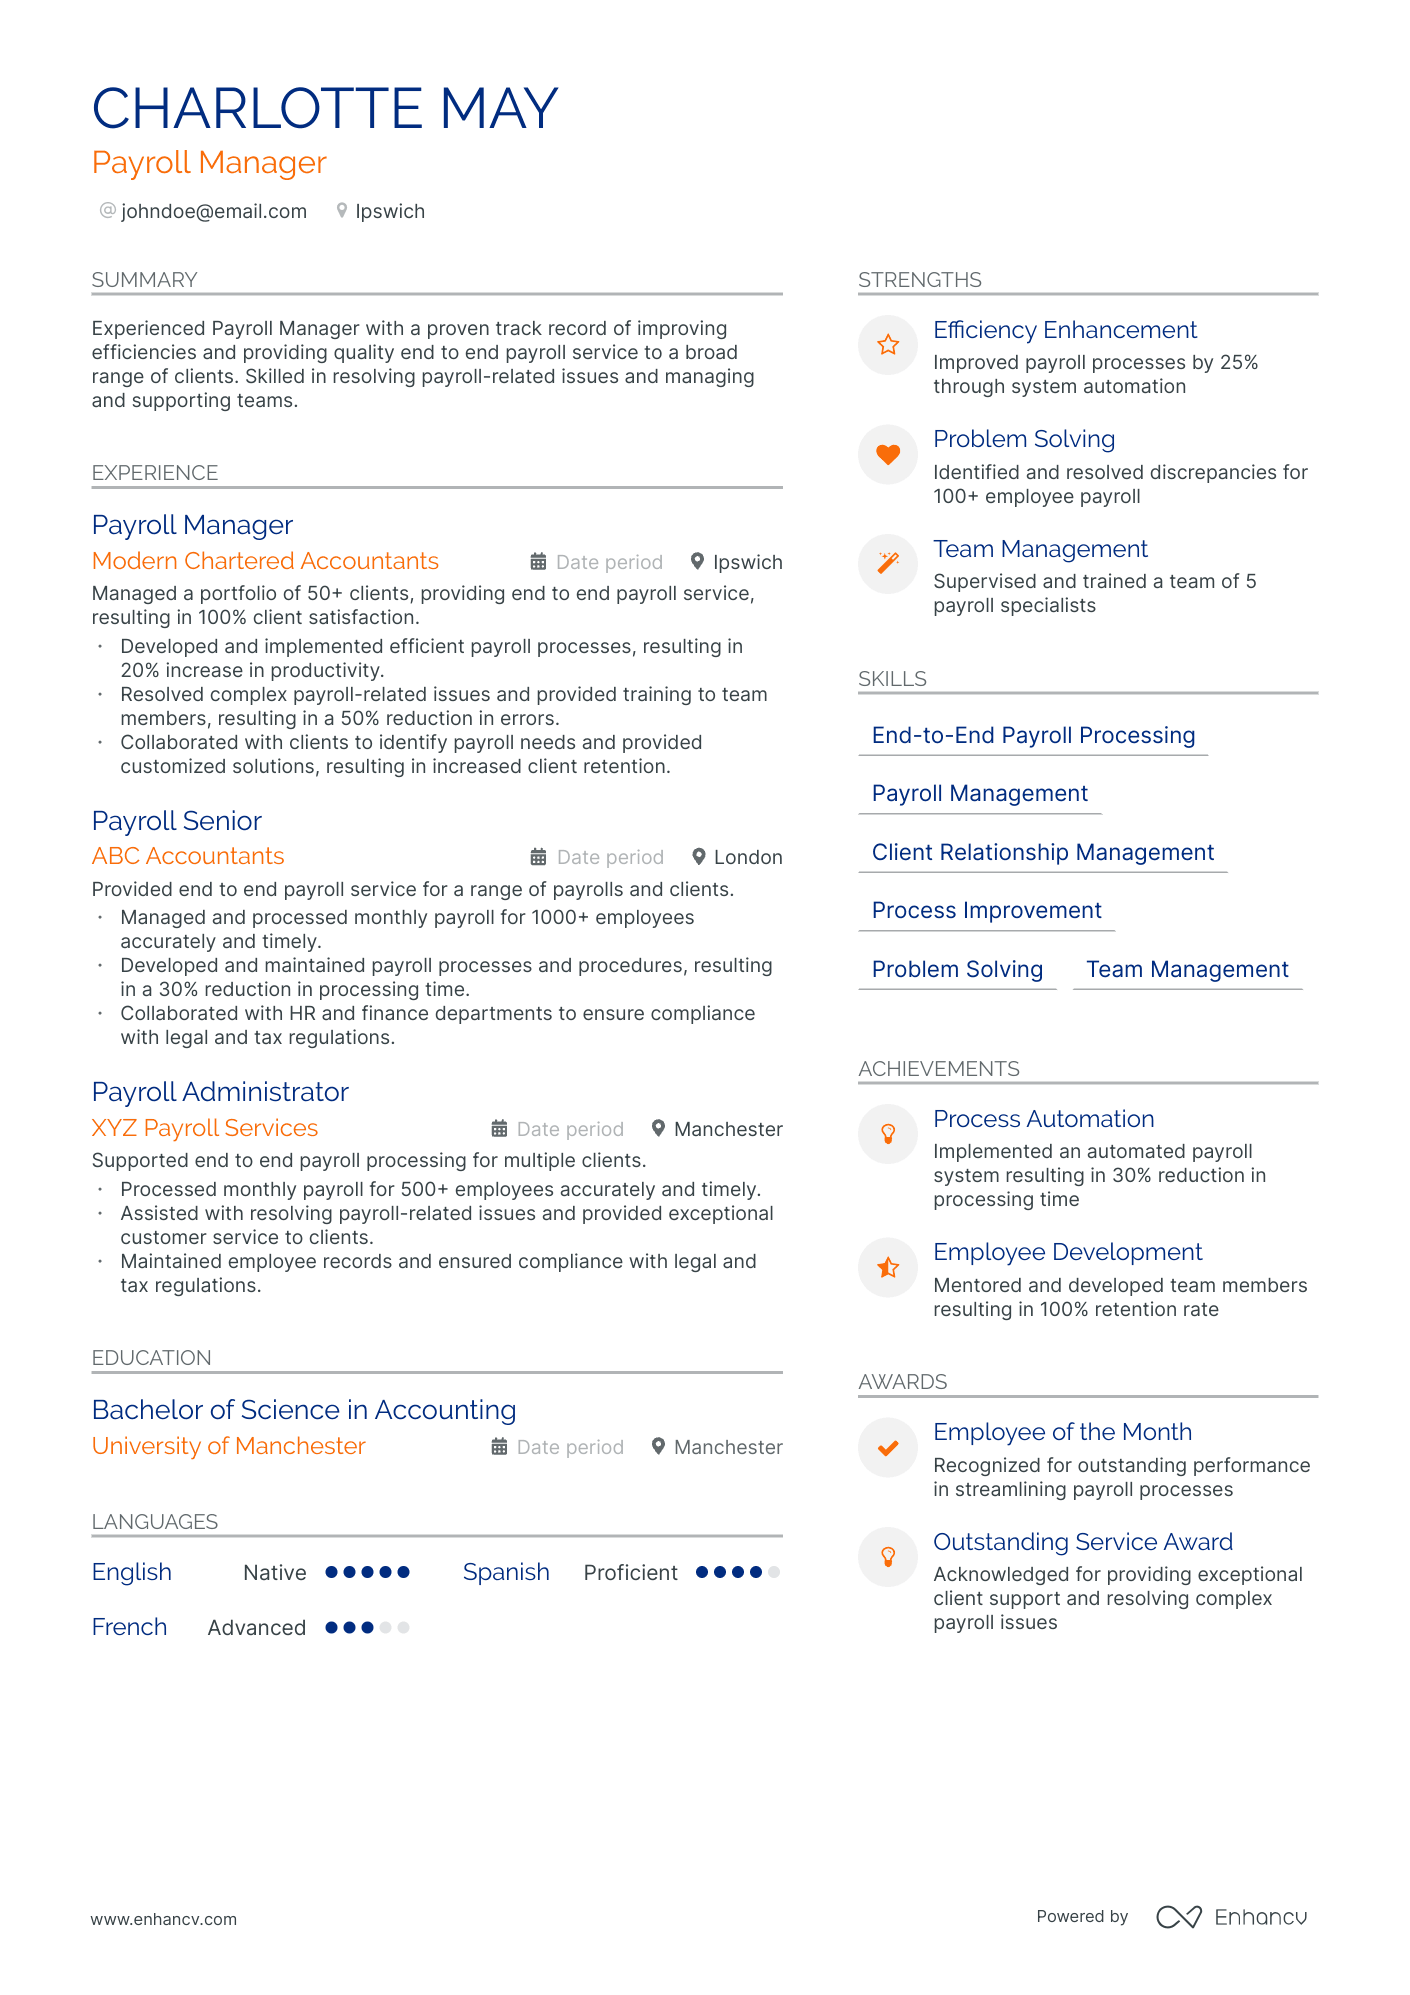 Payroll Manager resume example